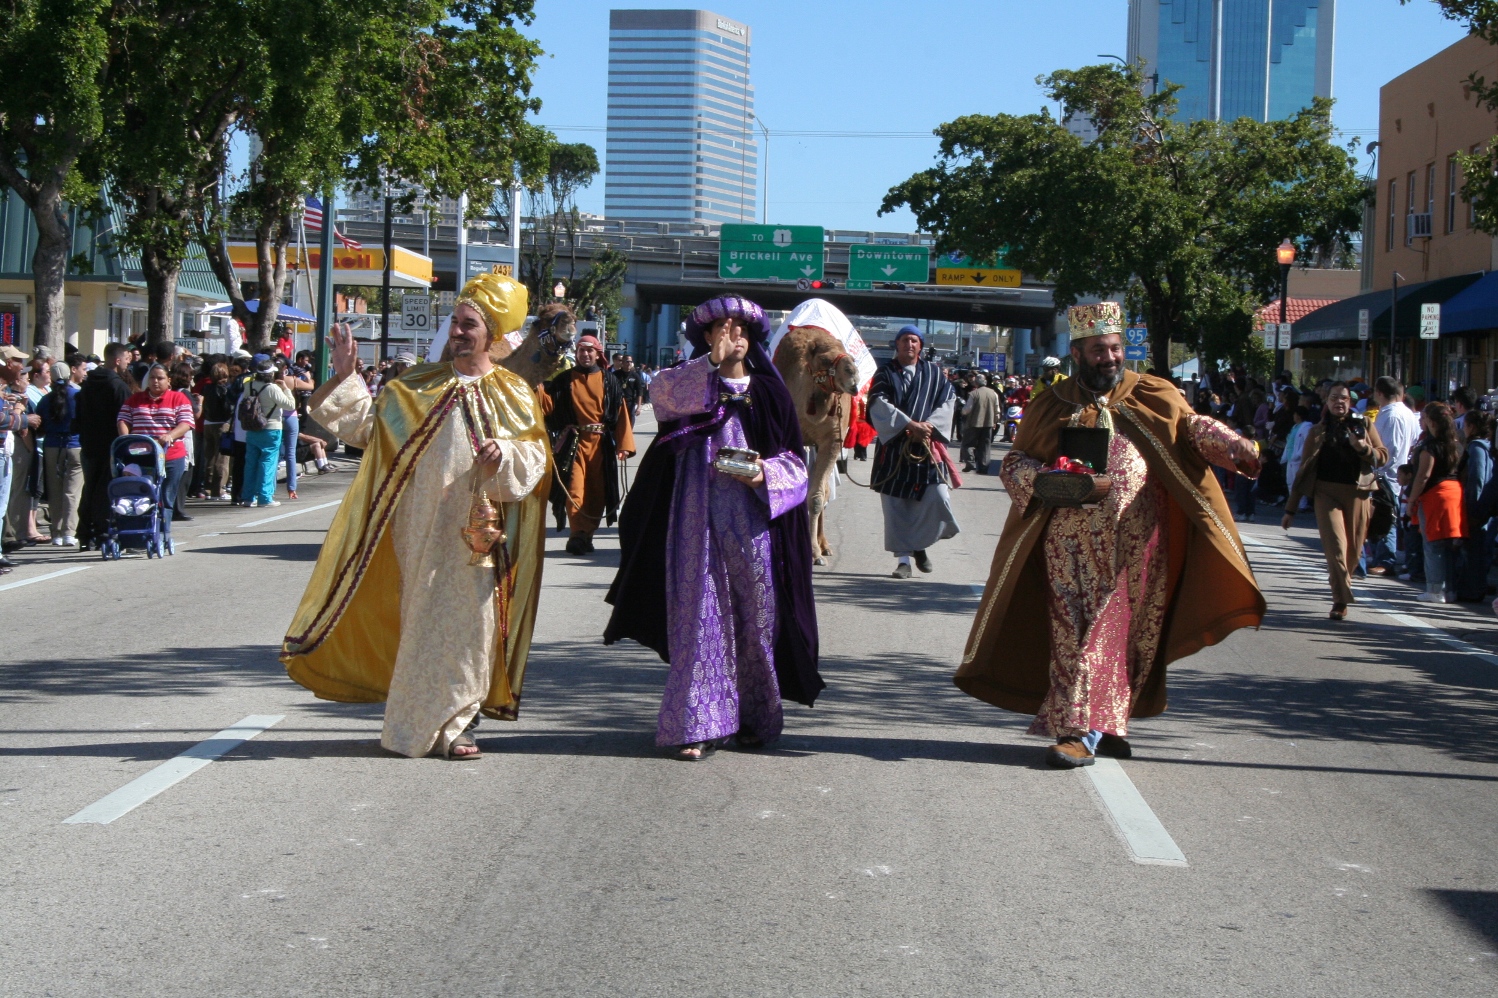 Univision Miami Presents the 48th Annual Three Kings Day Parade on